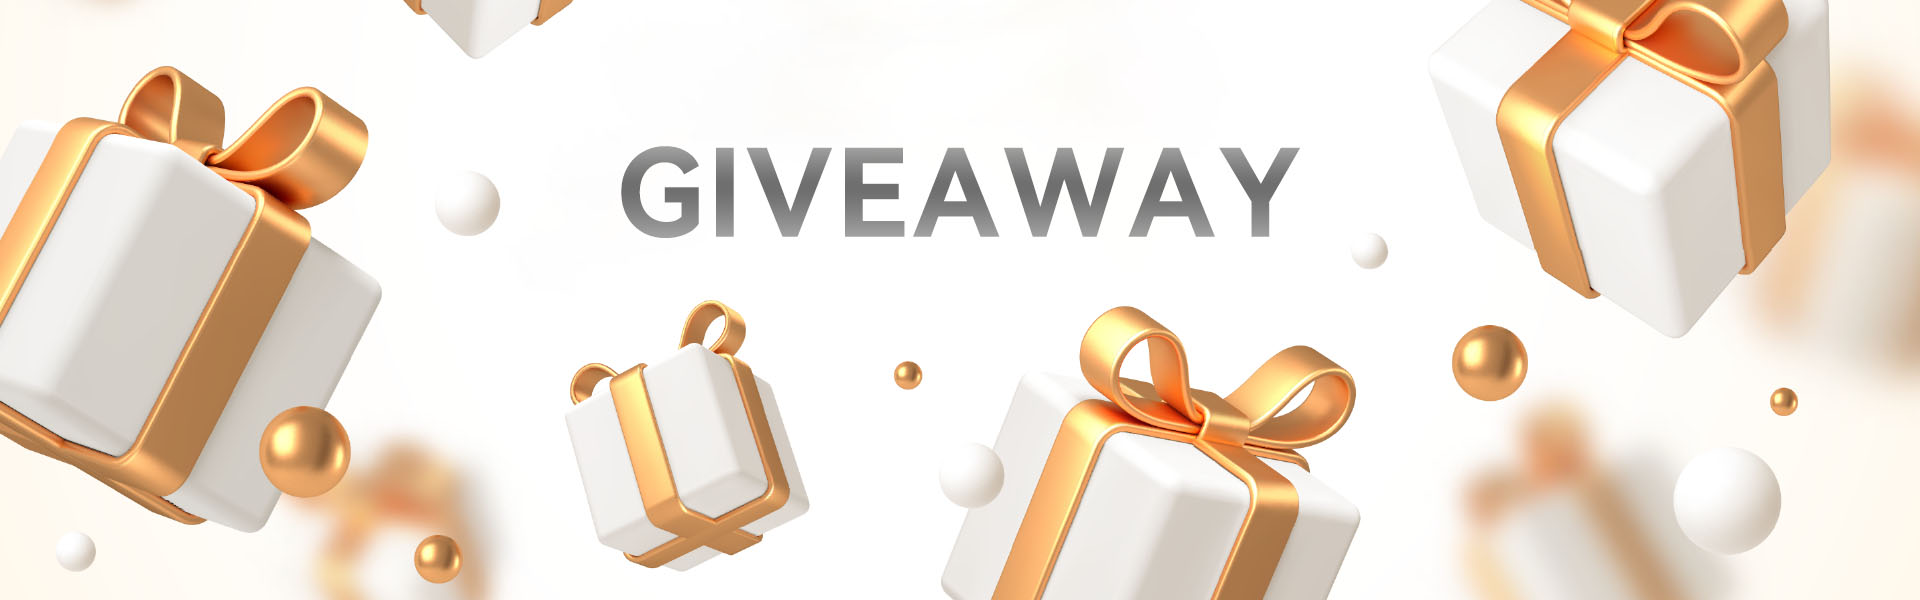 Free Smartphone Giveaway: Cubot Note 50 - Deals Giveaway Coupon Spin Win  Contest 2024